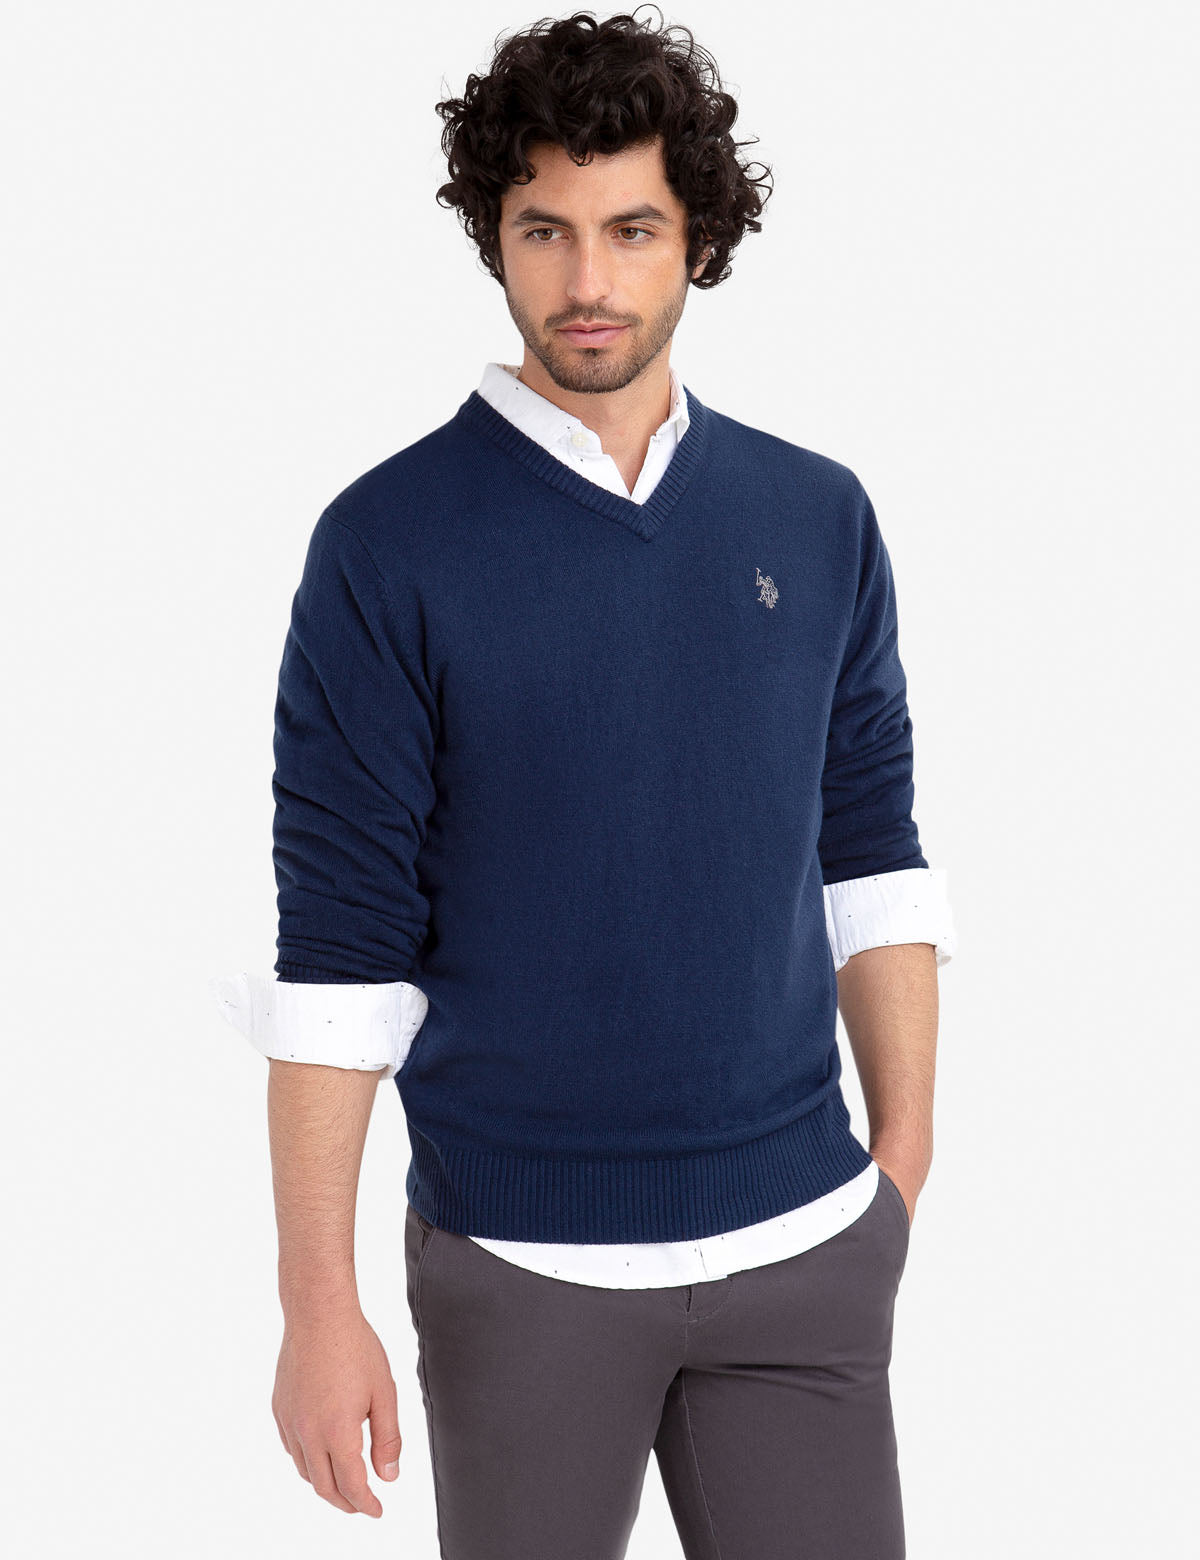 v neck sweater with polo shirt